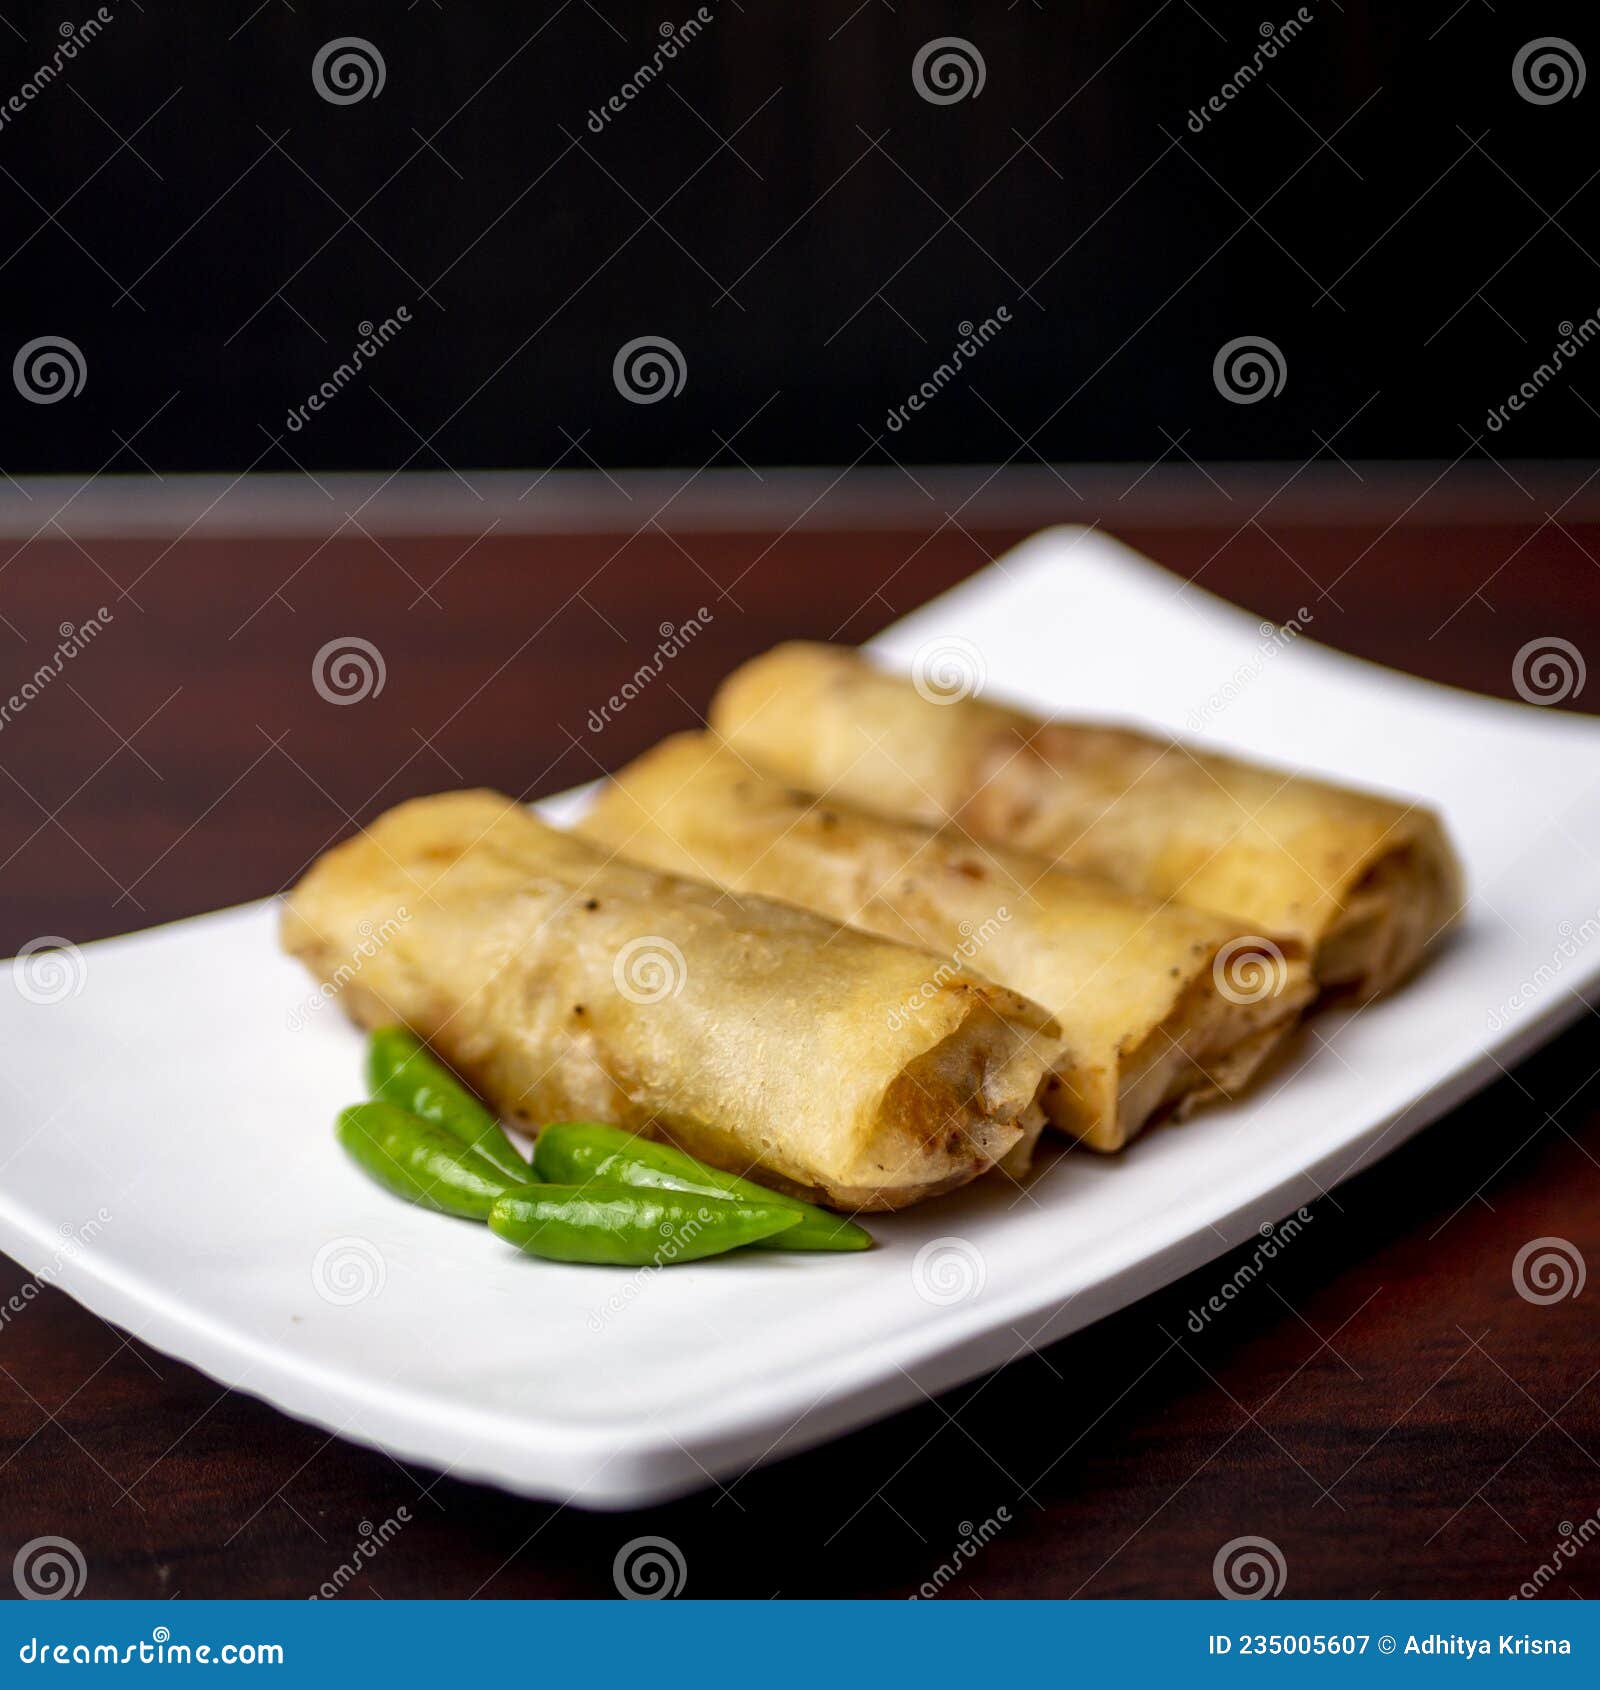 Photo How to Make Spring Rolls from Semarang City